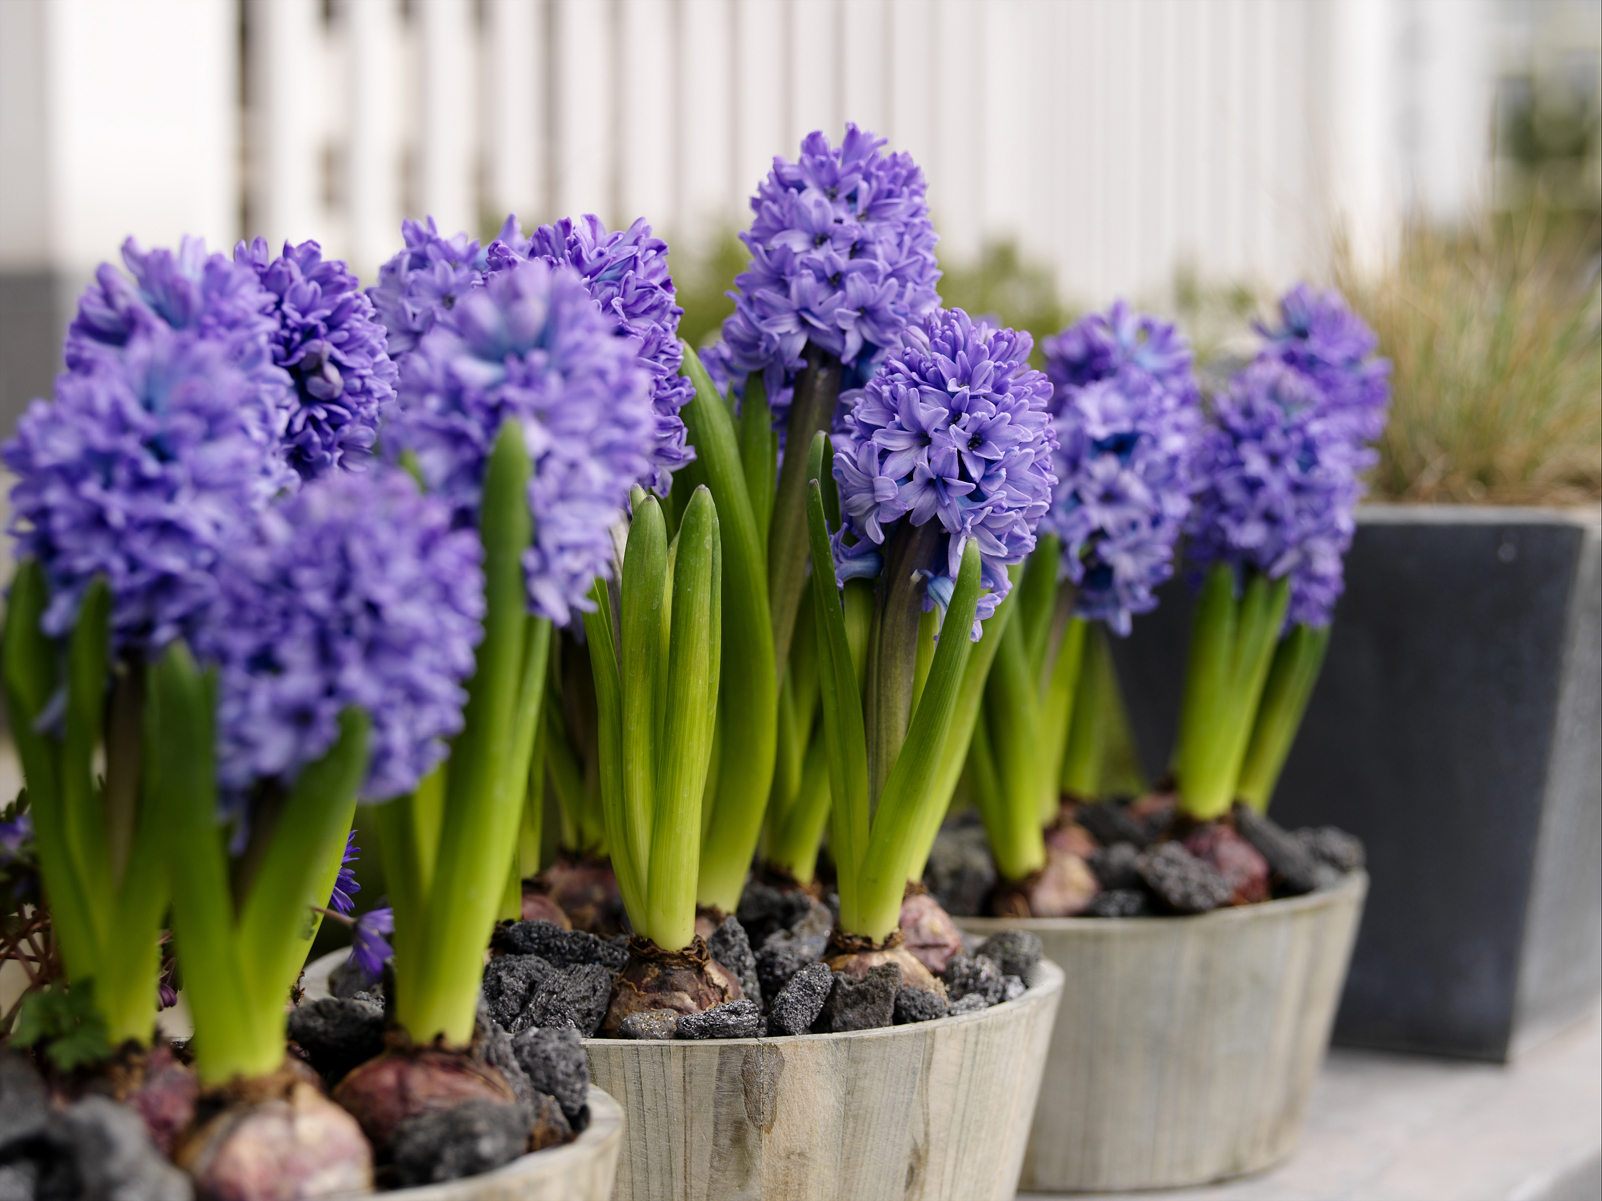 Hyacinth flowers at home wallpapers and images - wallpapers ...